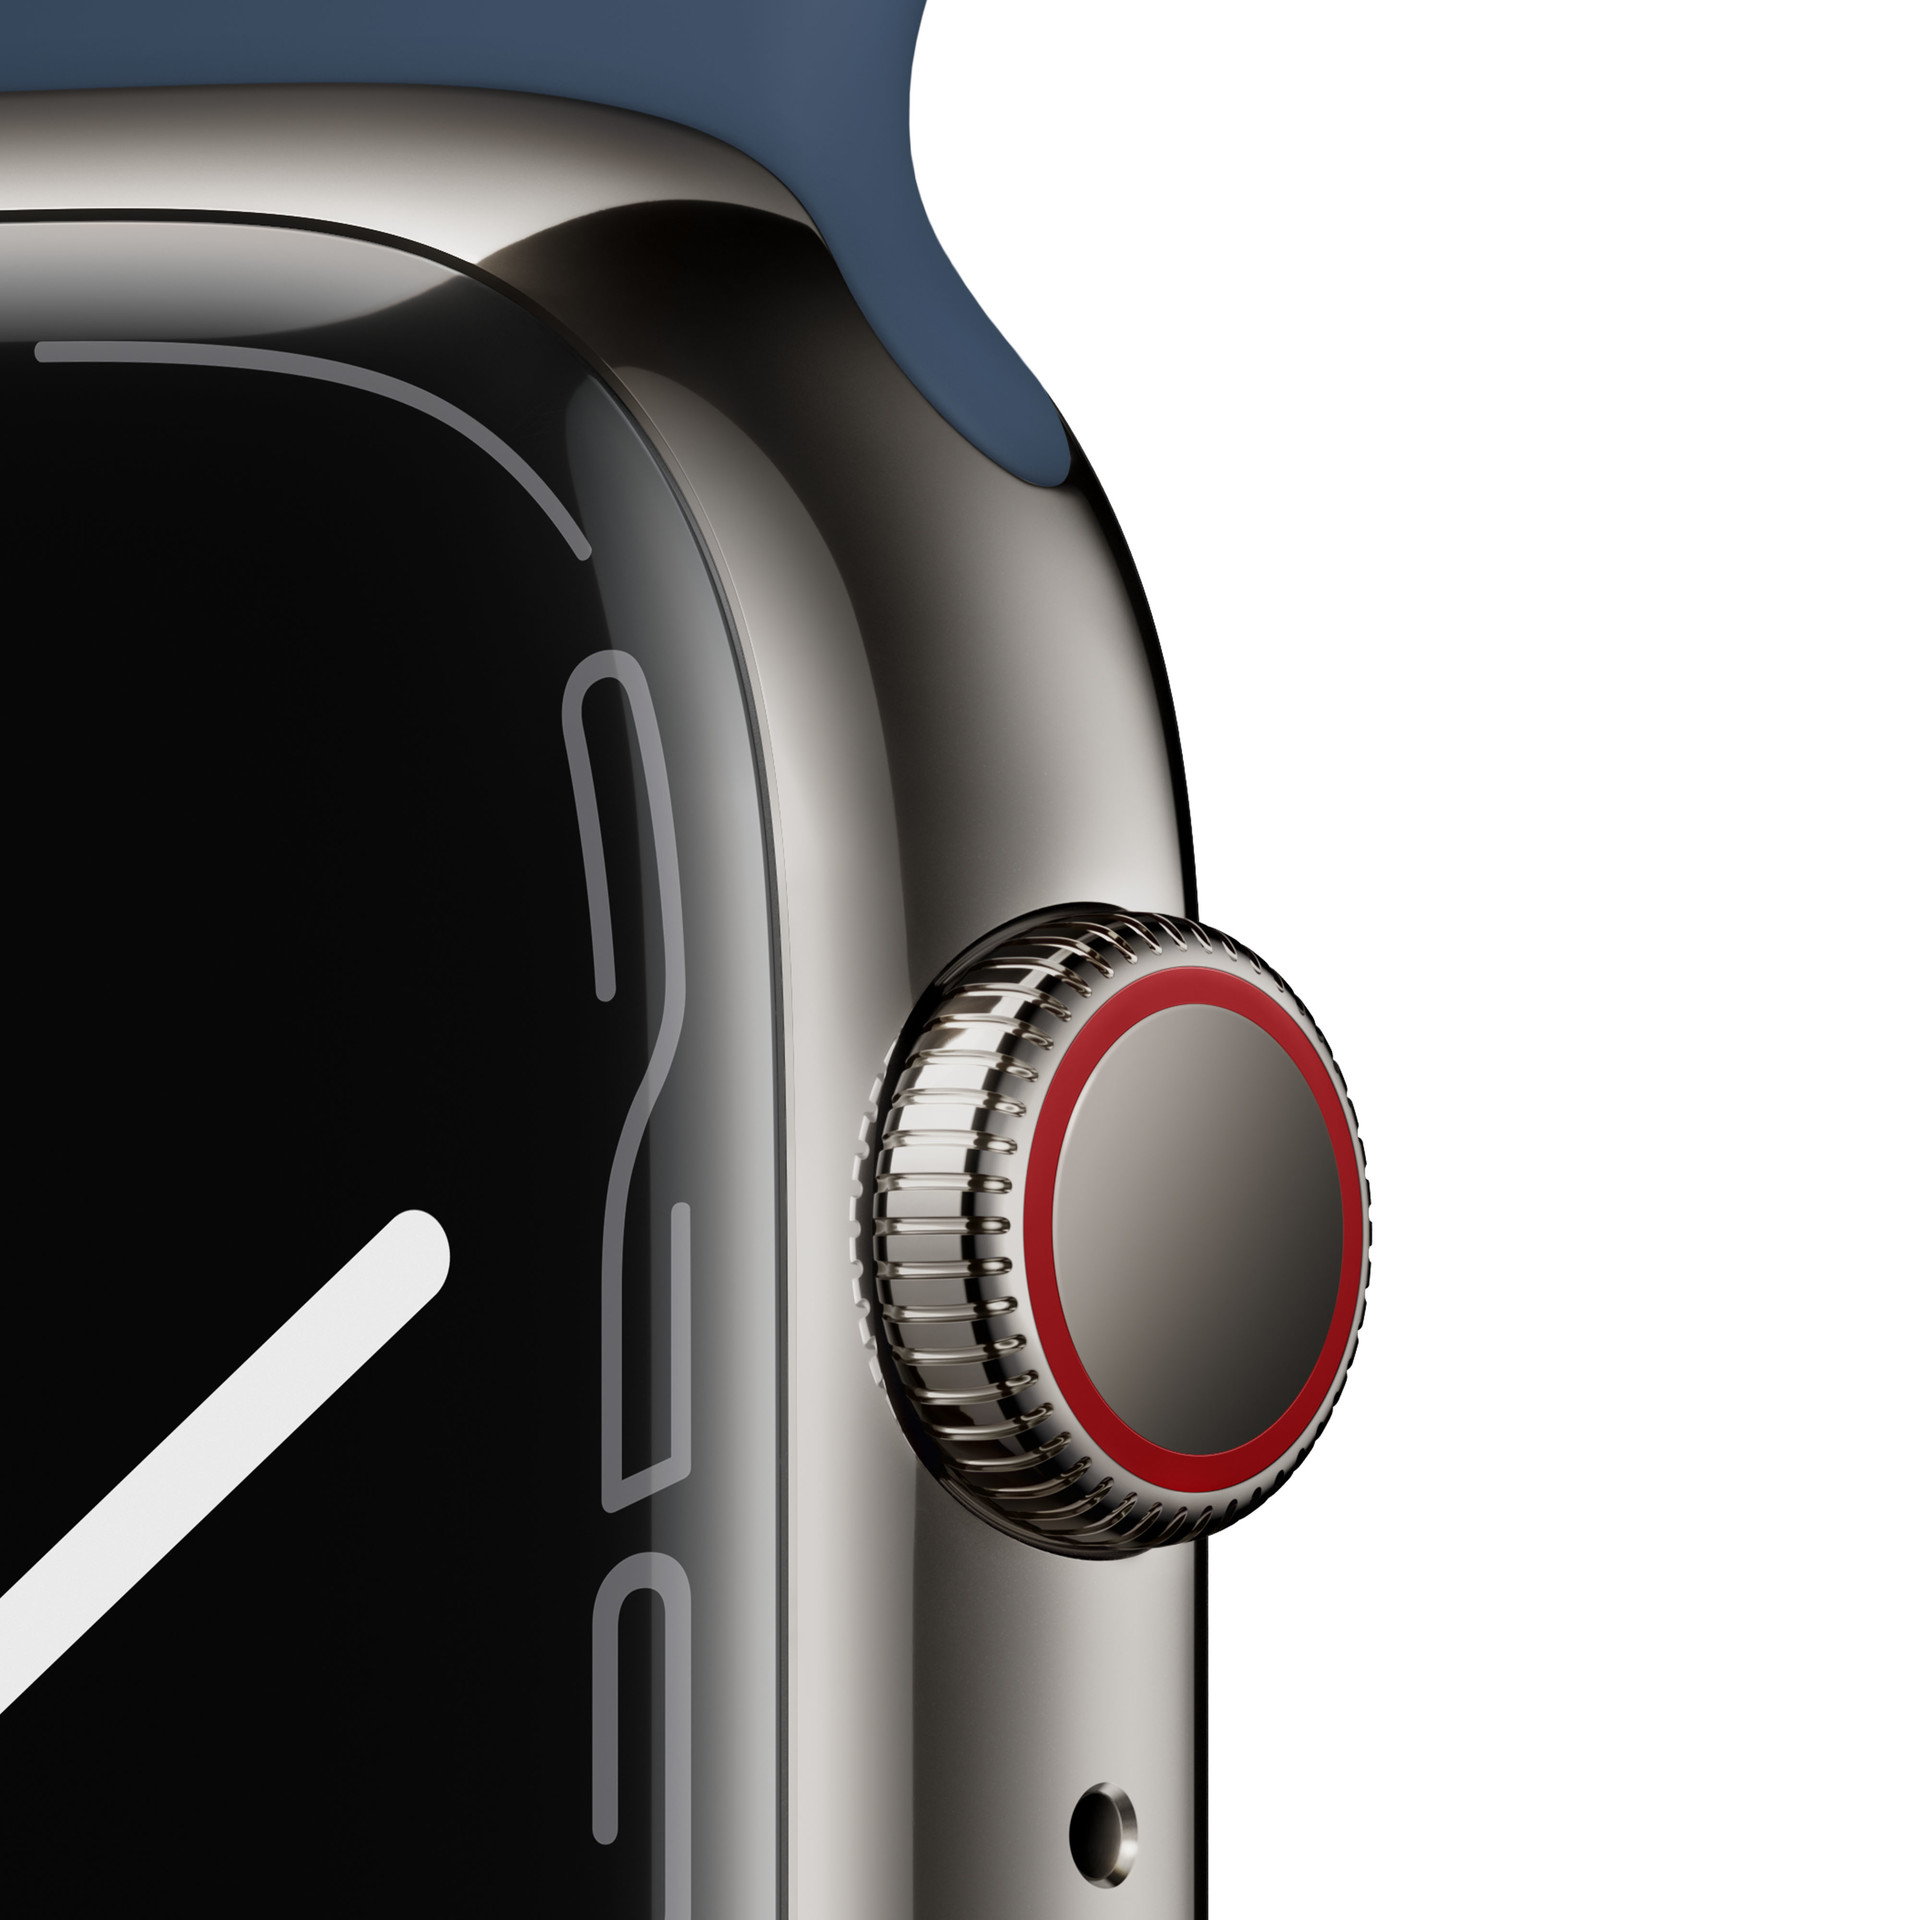 graphite stainless steel apple watch